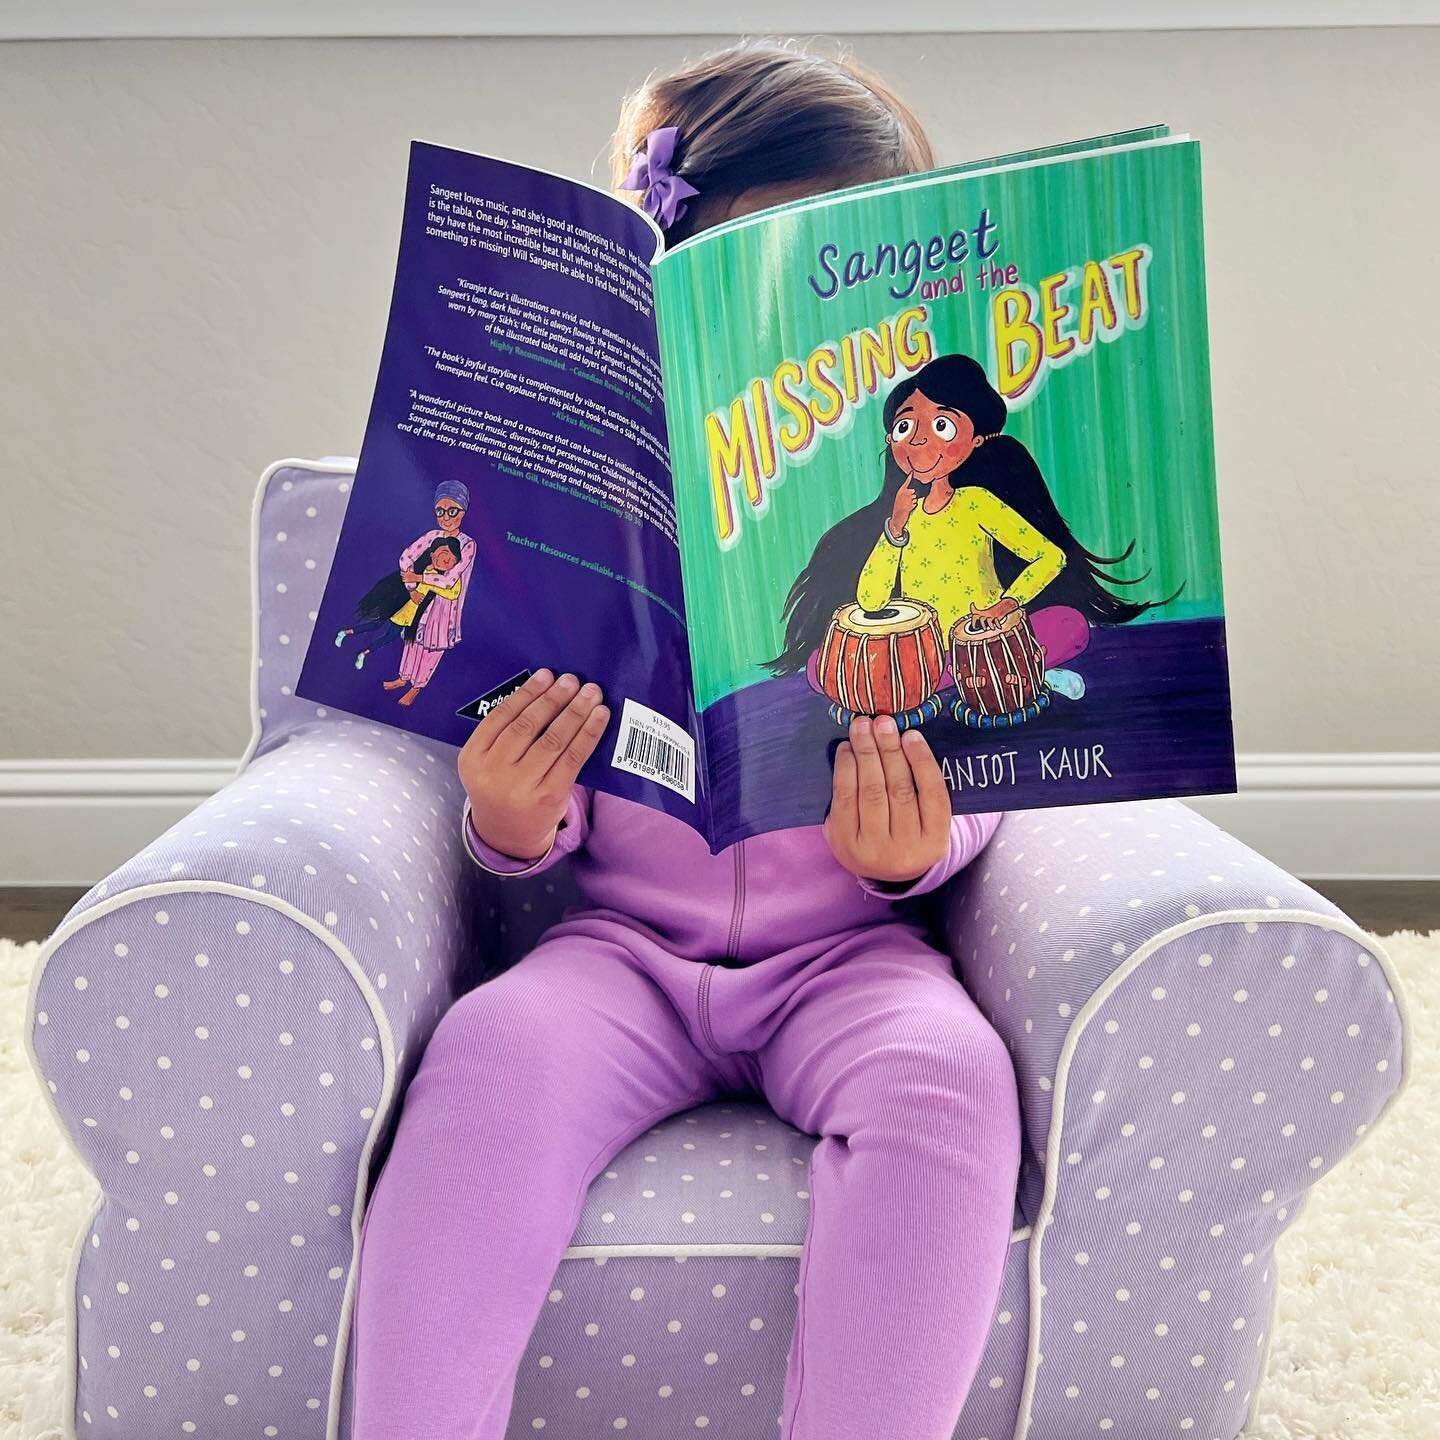 Reading Corner | Sangeet and the Missing Beat

Do you have a favorite musical instrument? In today's book pick, we learn all about Sangeet and her favorite instrument, the tabla. &quot;Sangeet and the Missing Beat&quot; written&nbsp;and illustrated b